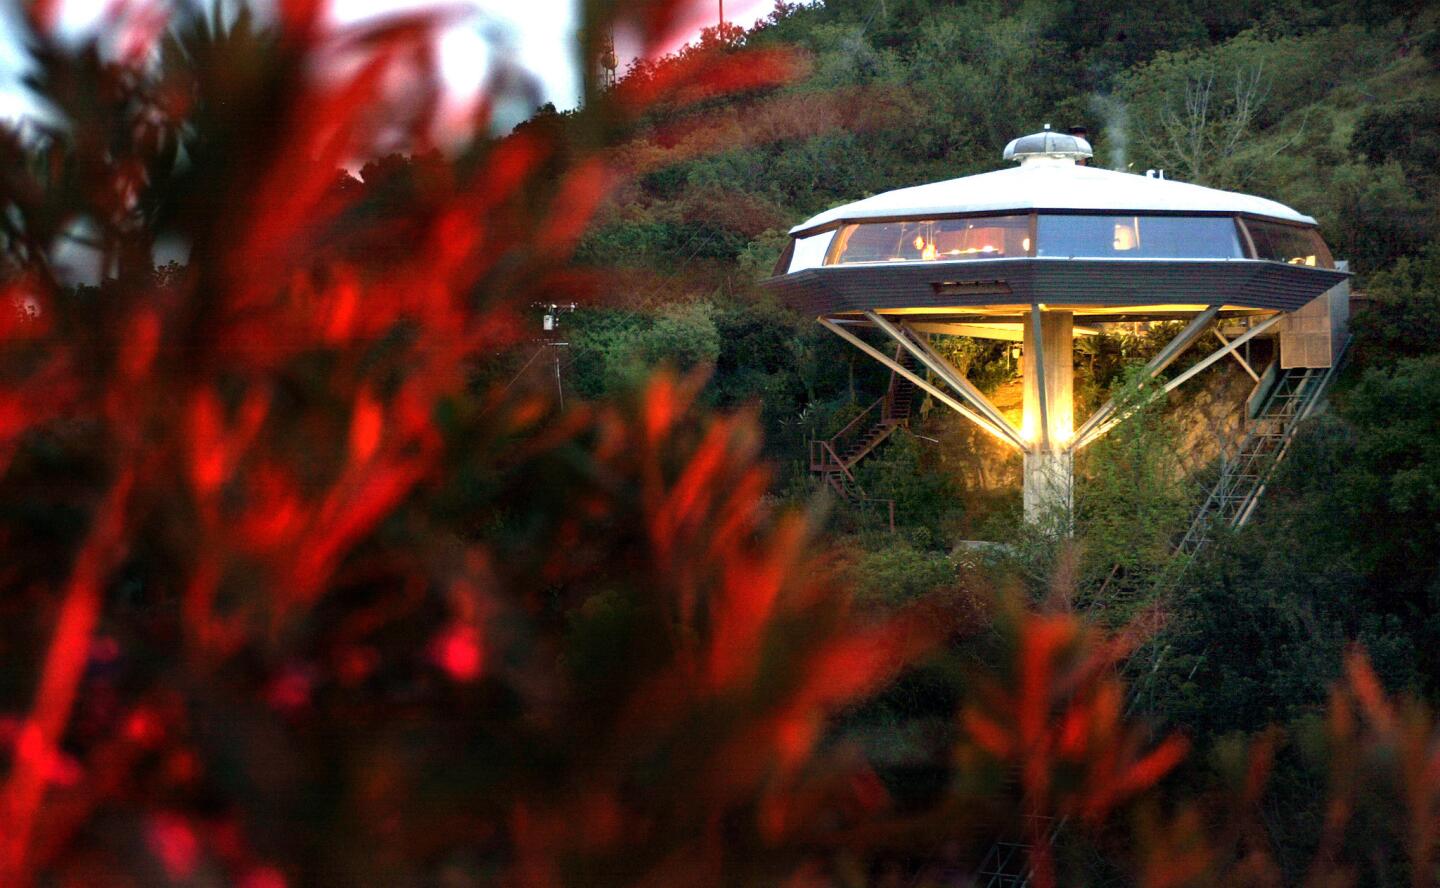 John Lautner's 1960 Chemosphere, shown here, originally derided by some critics as a silly fantasy.